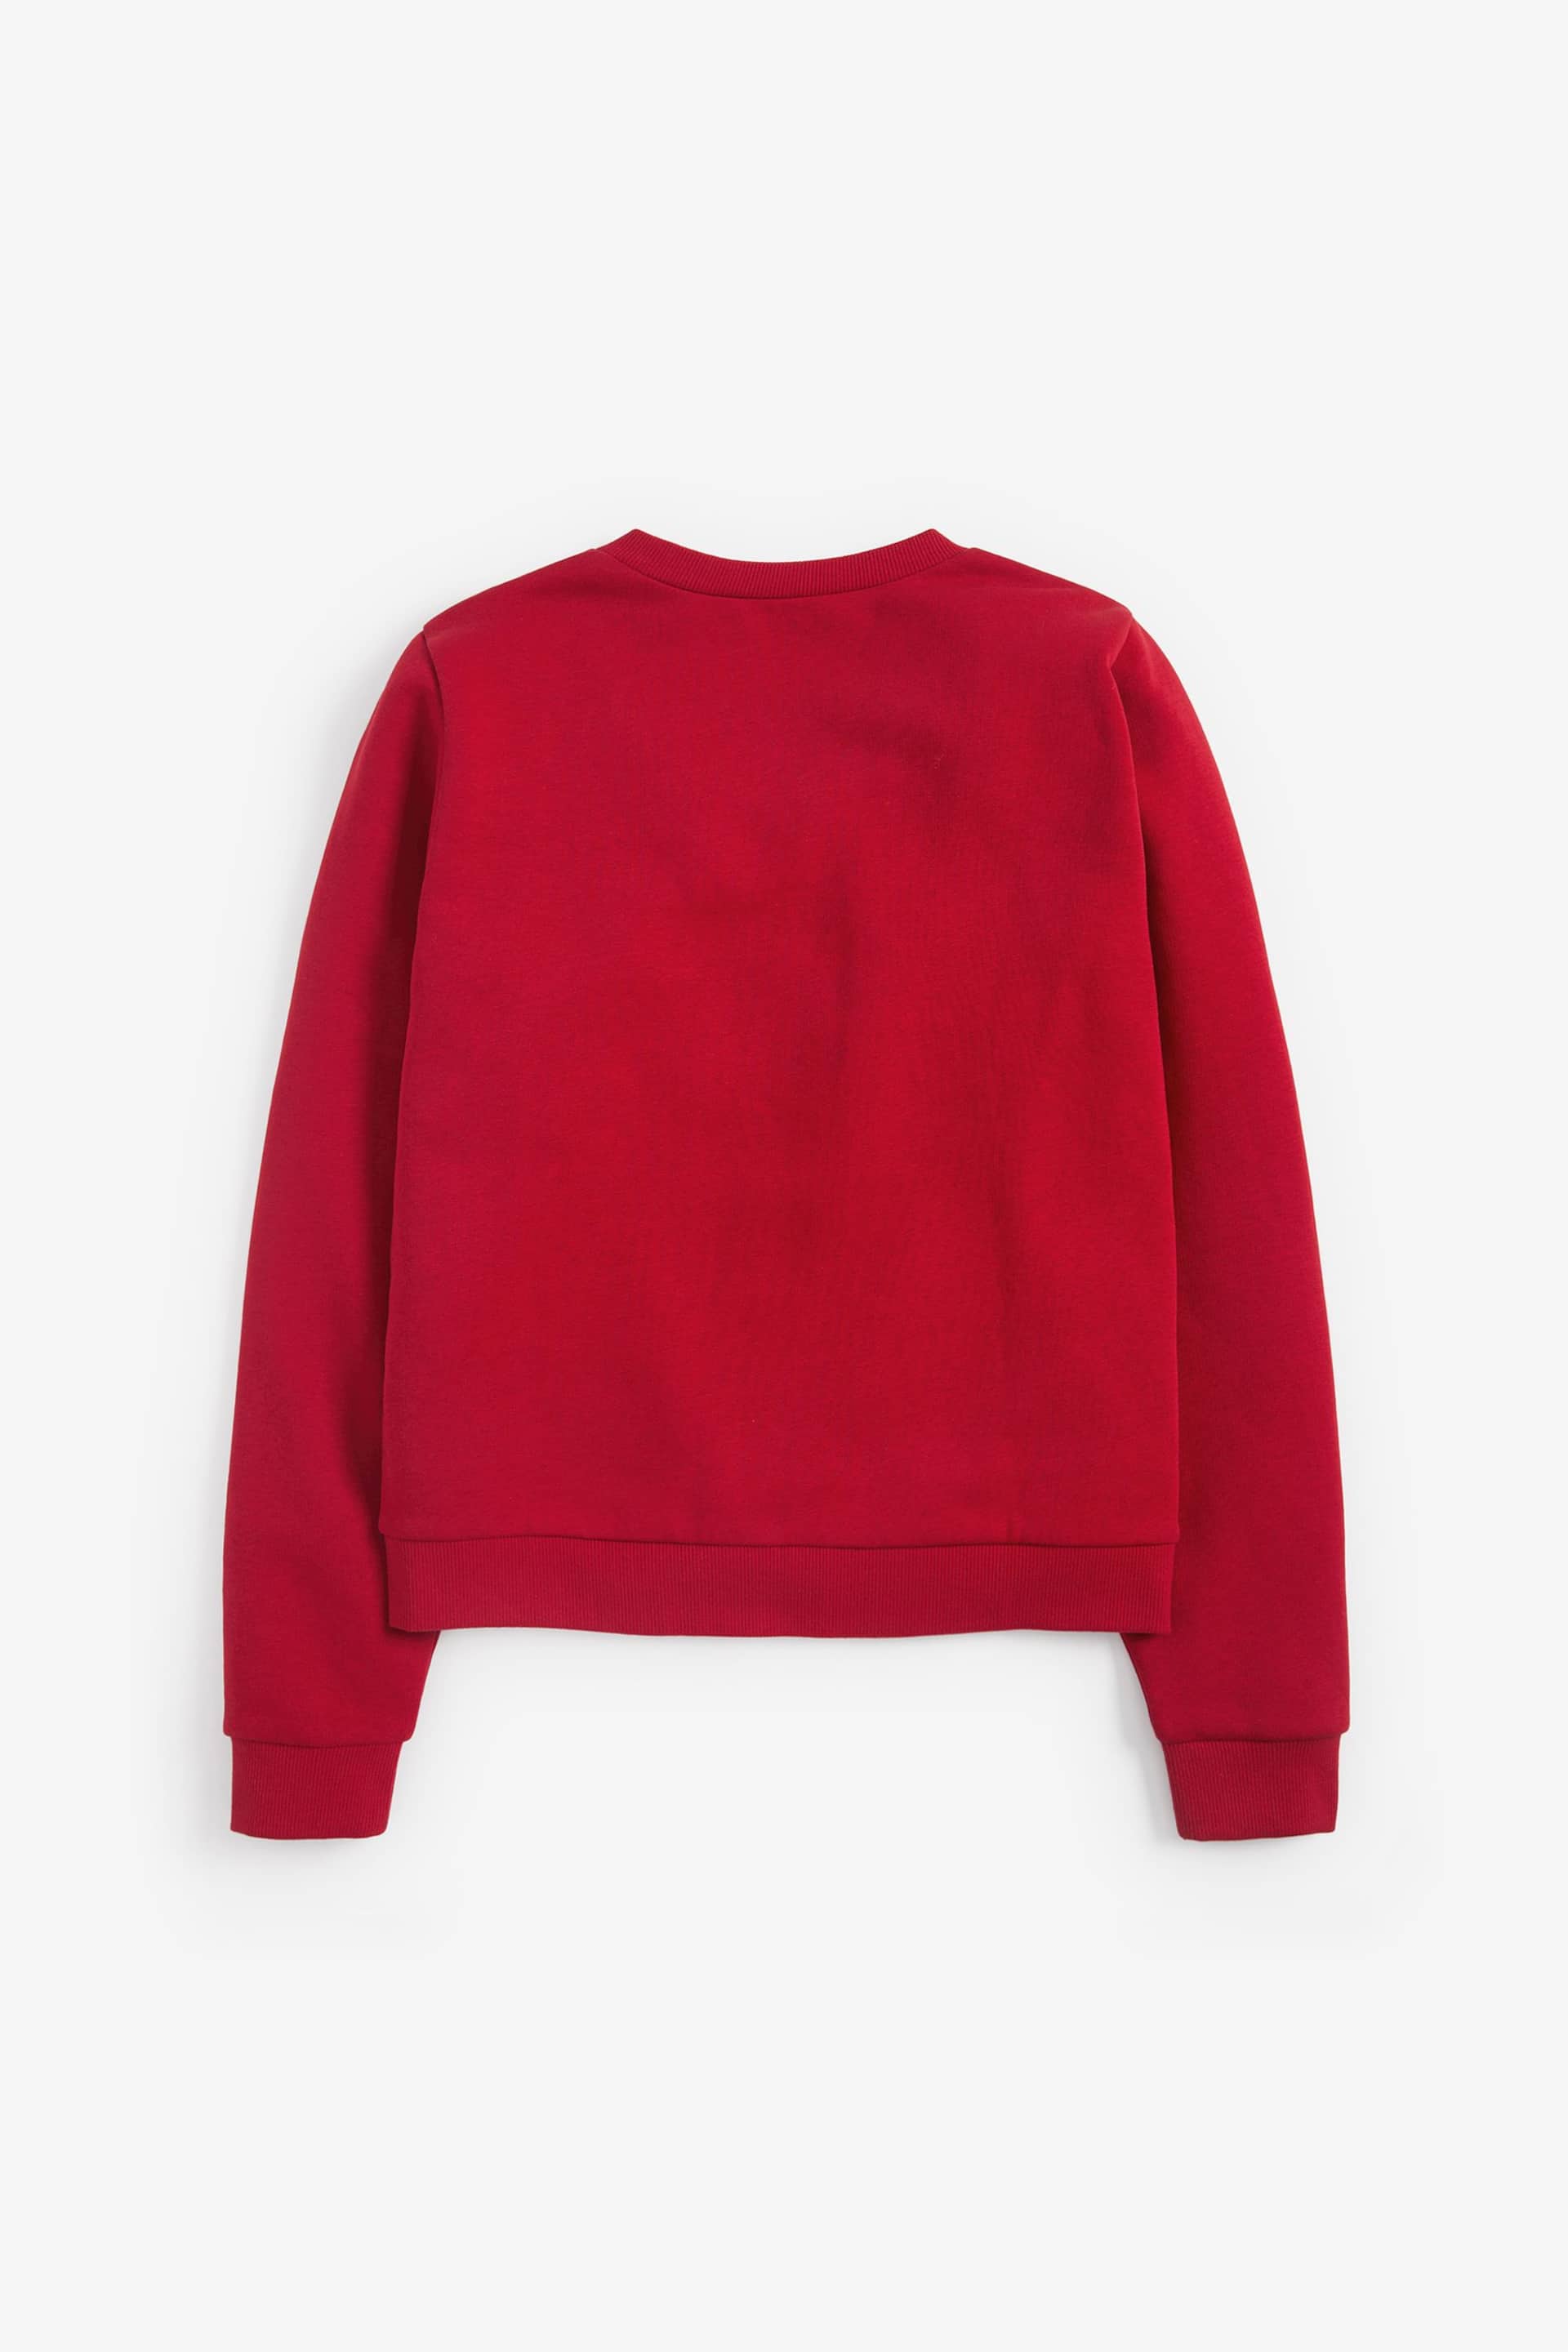 Red Cotton Rich Frill Pocket Jersey School Cardigan (3-16yrs) - Image 6 of 7